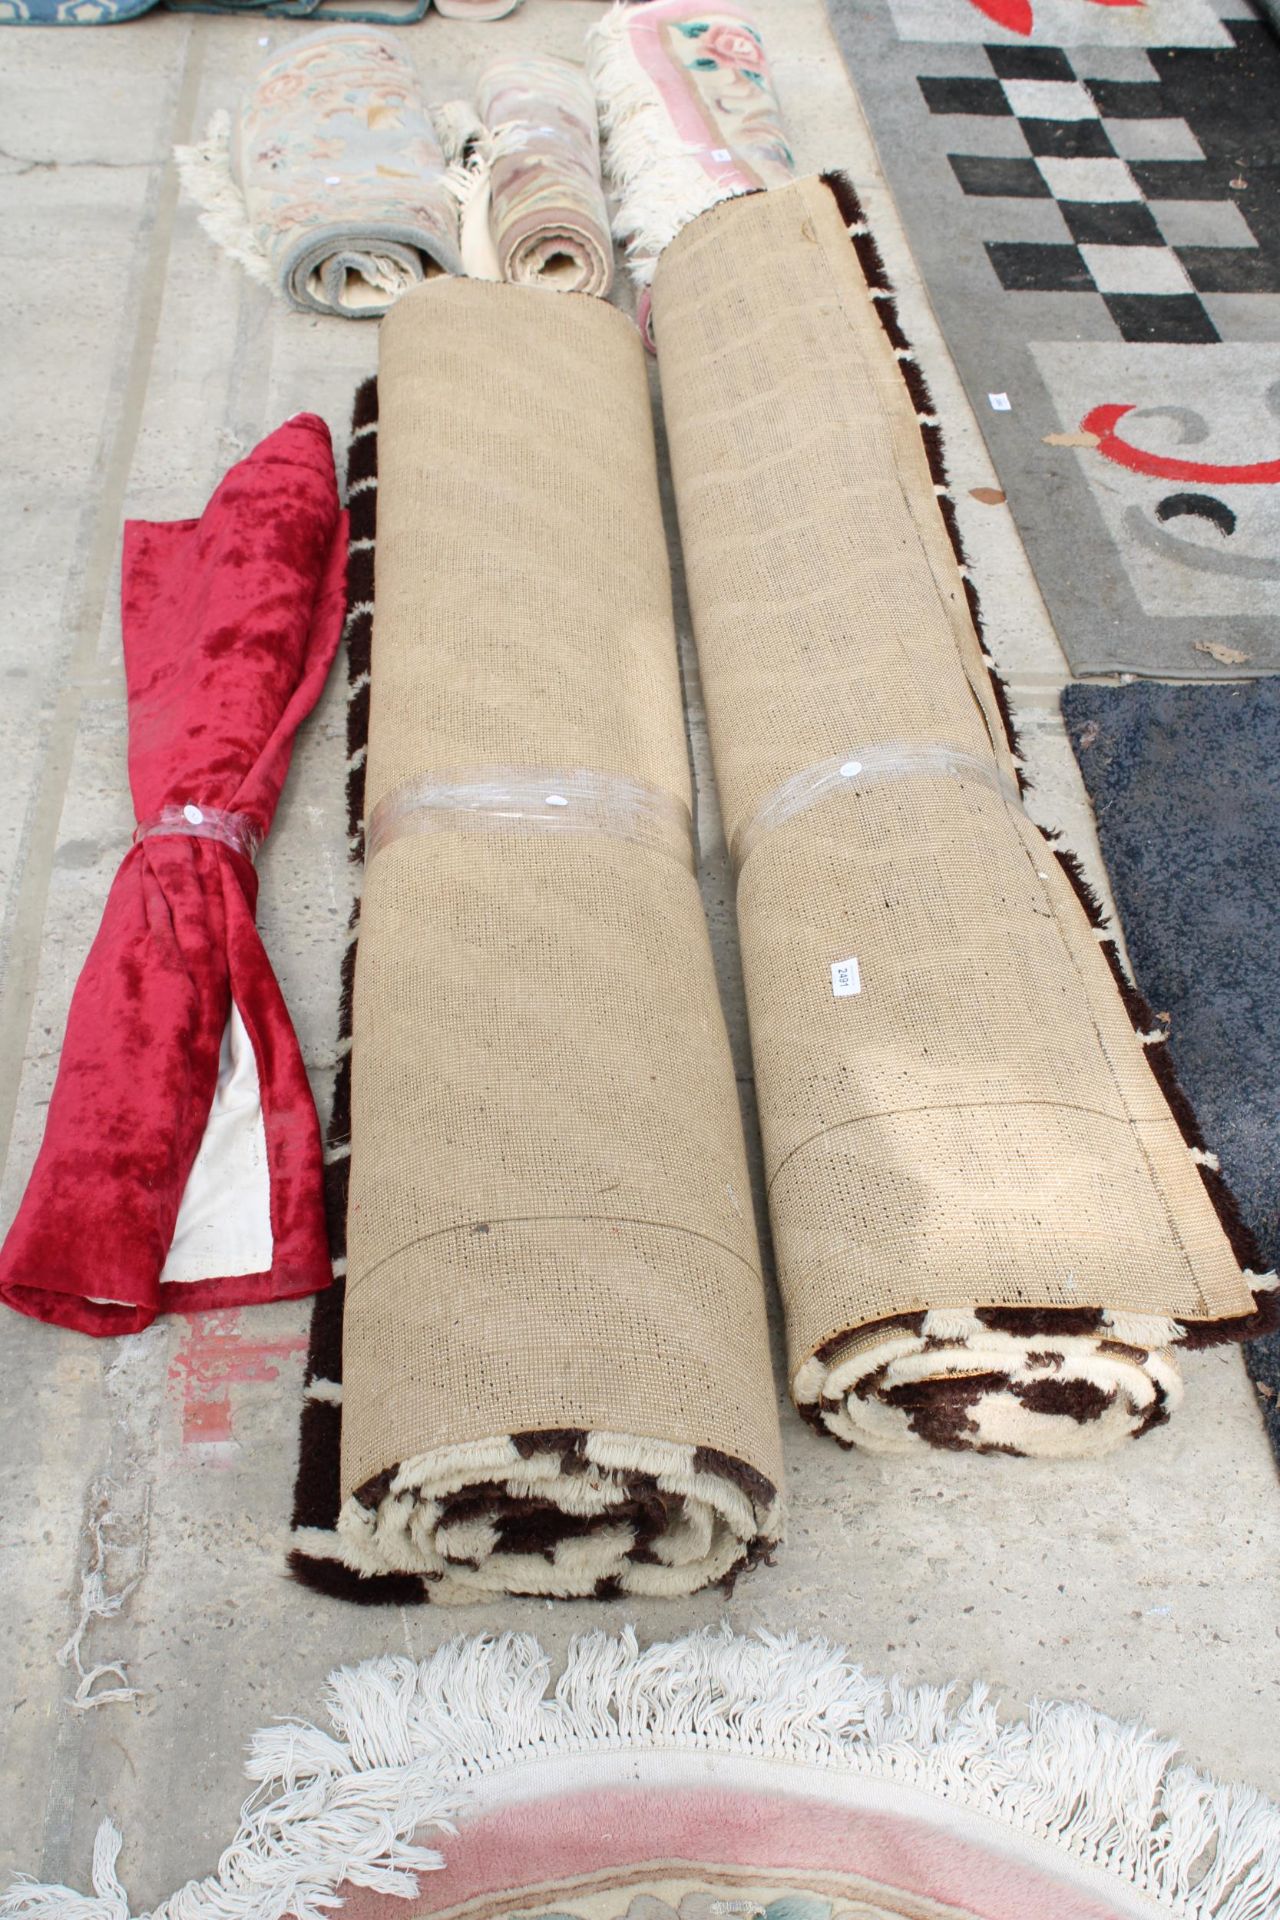 TWO LARGE BROWN PATTERNED RUGS AND A ROLL OF MATERIAL